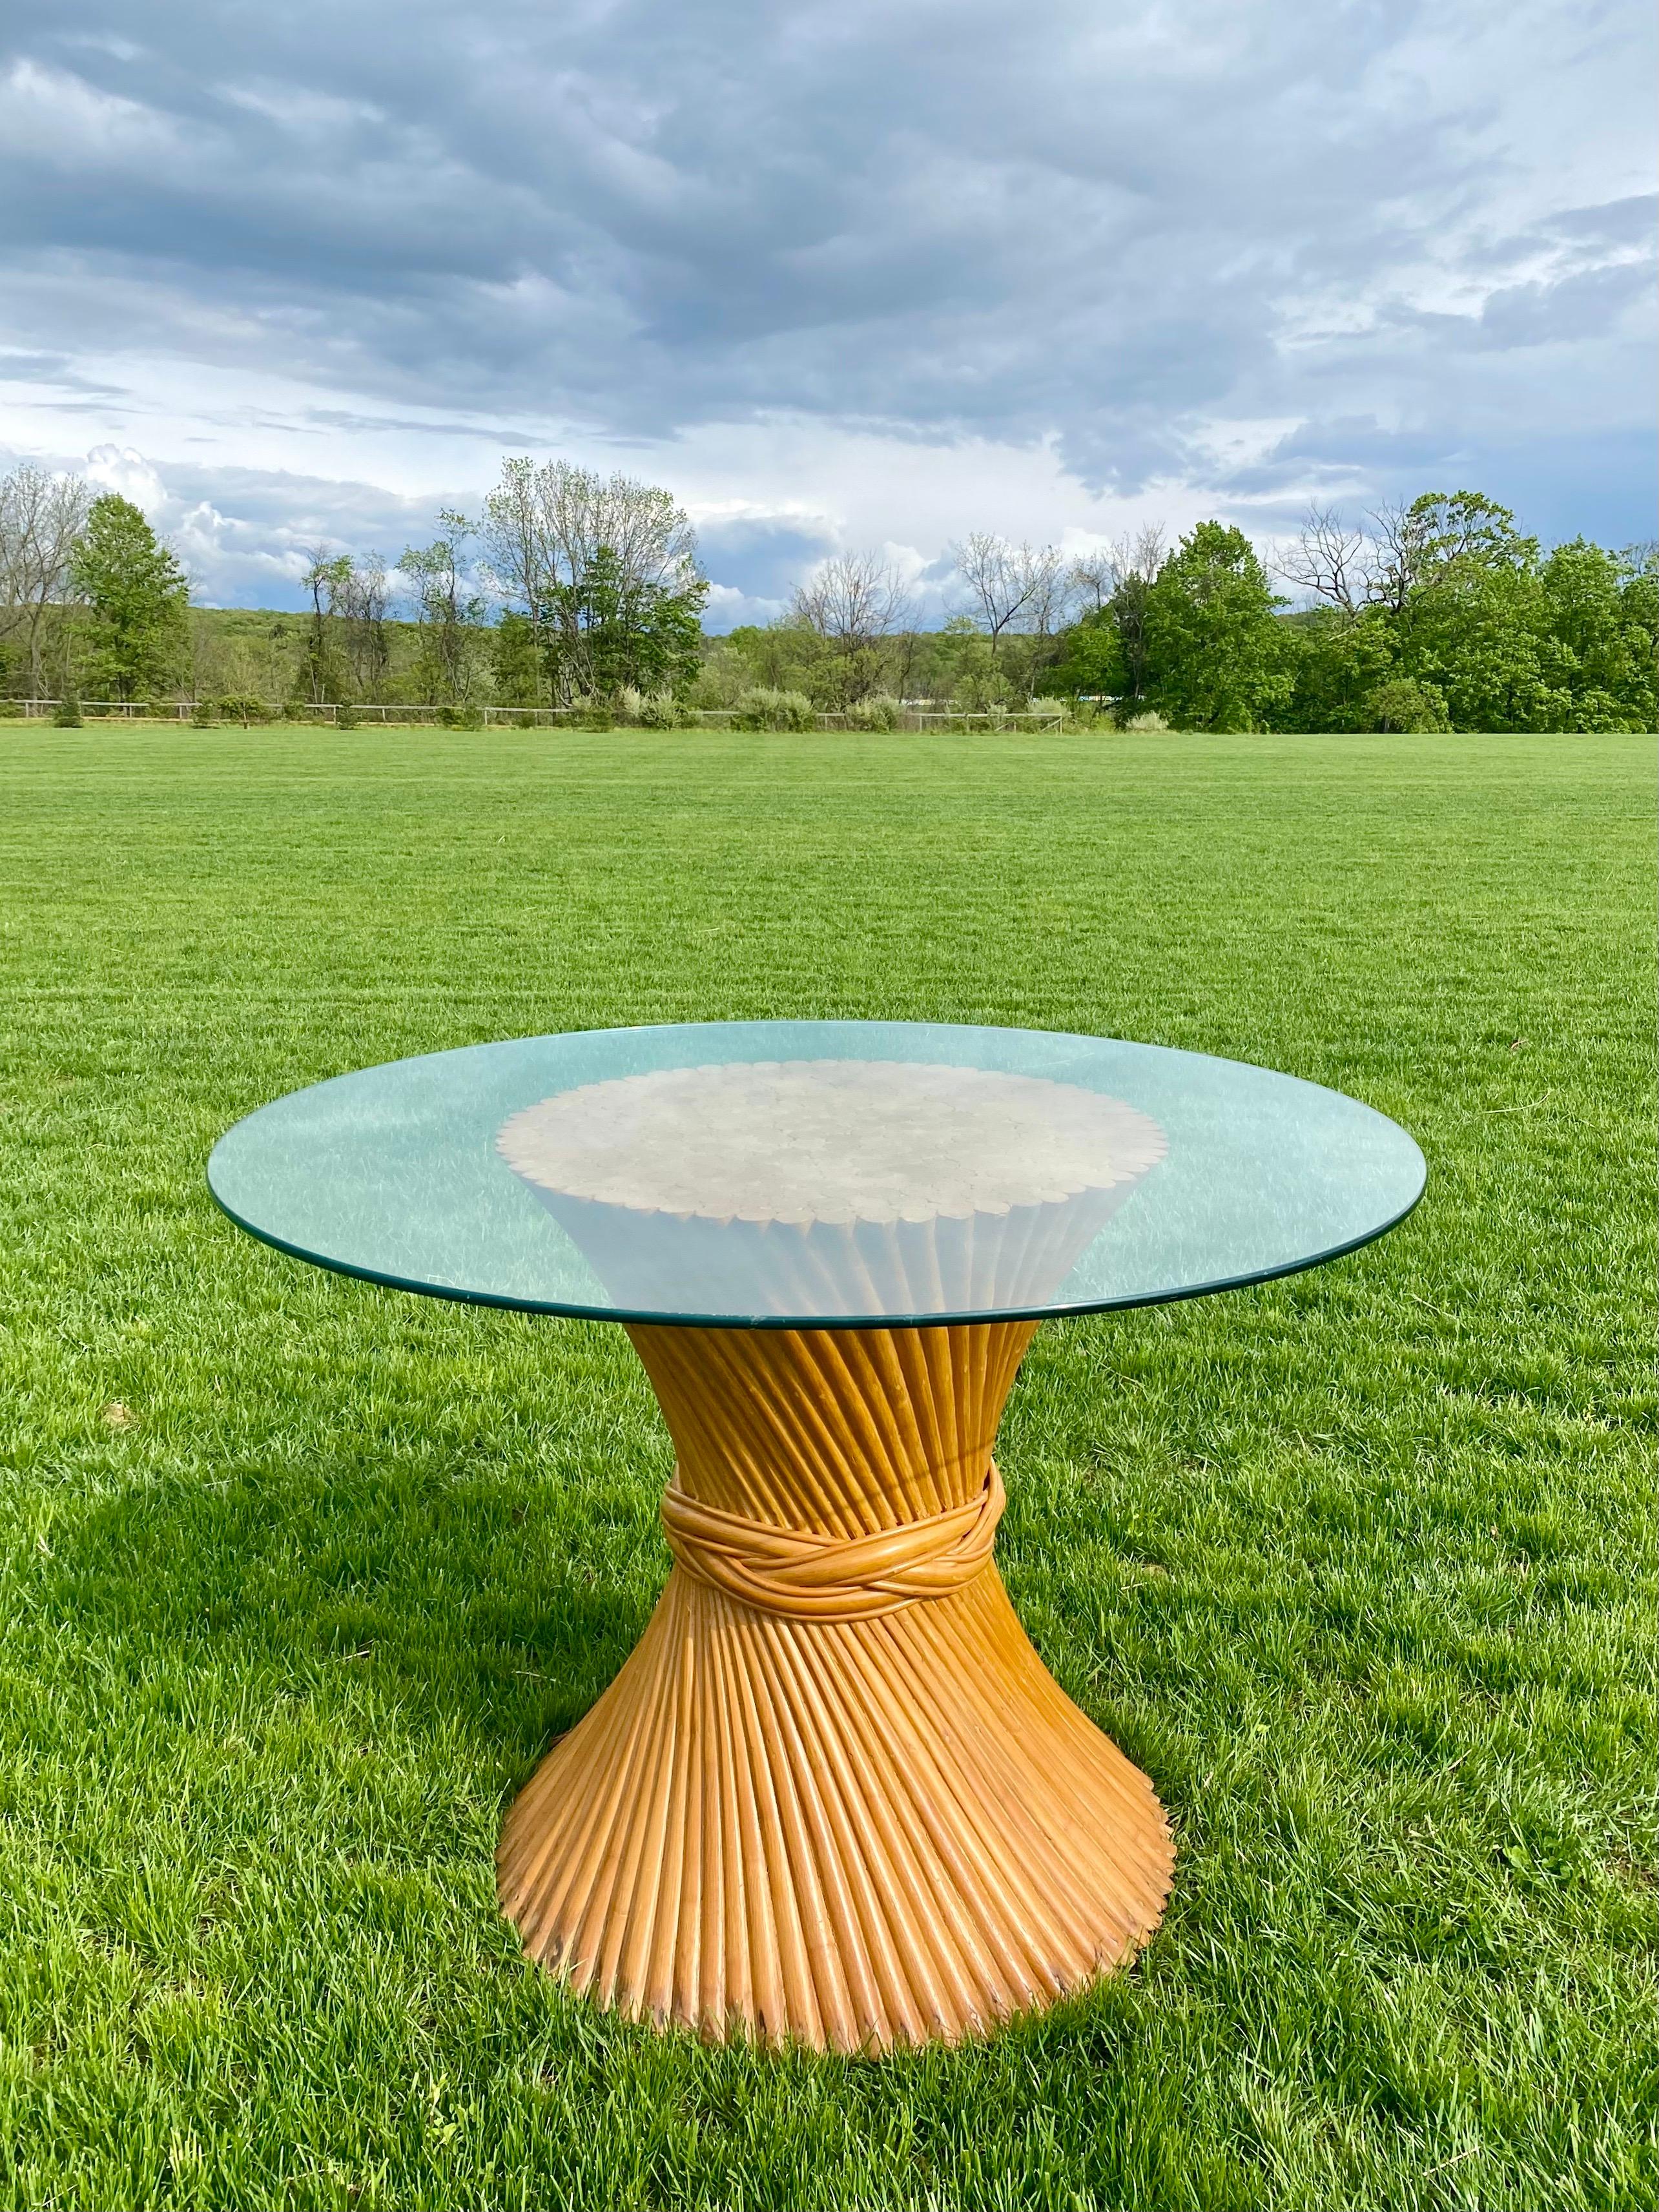 Sculptural Mid-Century Modern sheaf of wheat dining pedestal table, in the style of McGuire. This circular palm regency style table features bent and twisted rattan bamboo wood rods and round glass top. Original finish in natural tone wood with